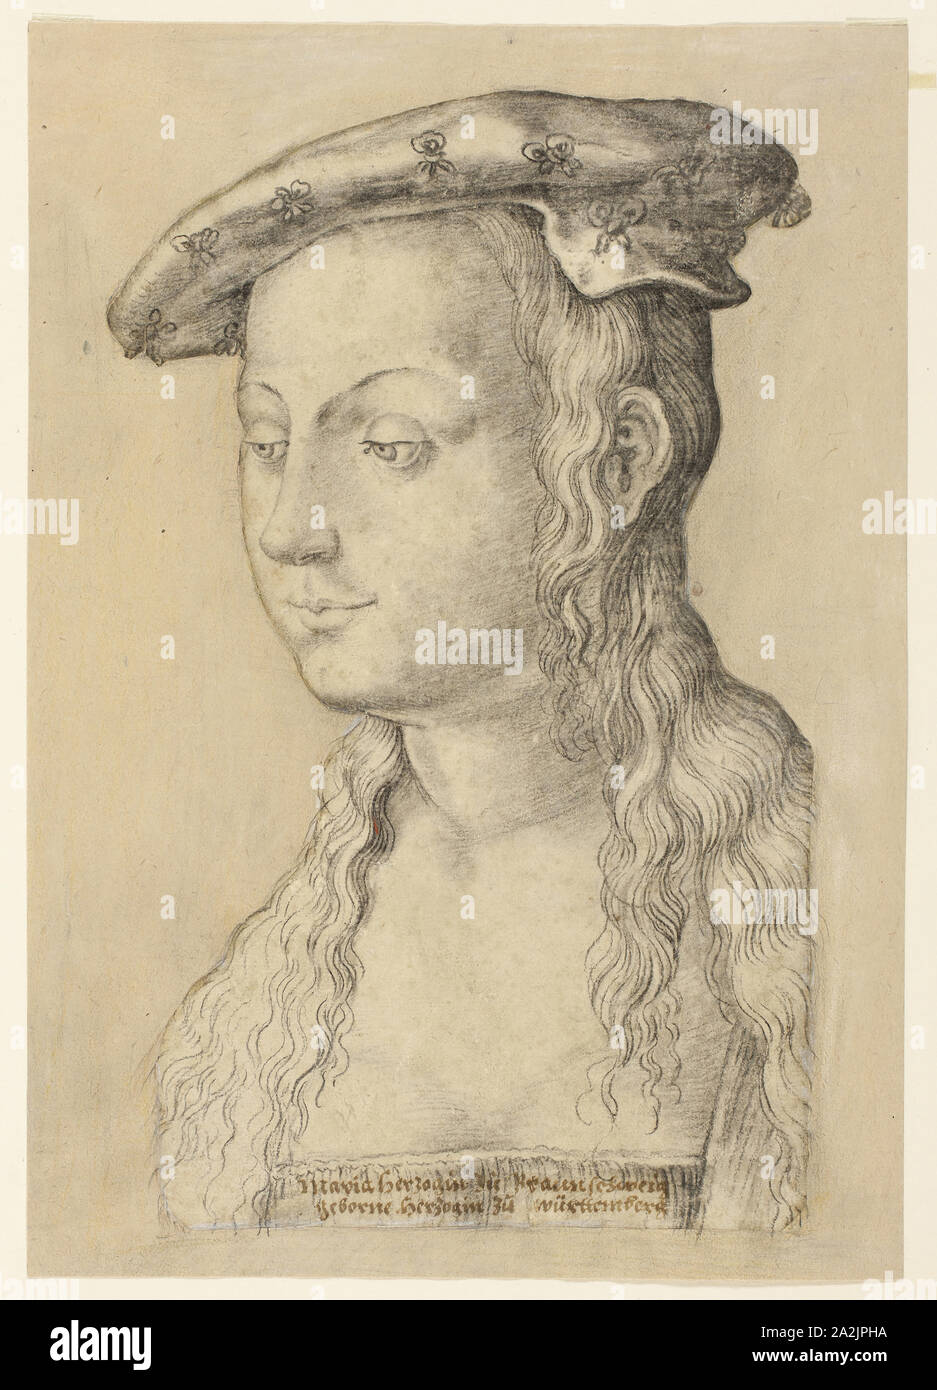 Maria Duchess of Brunswick, Born Duchess of Wurttemburg, n.d., Attributed to Christoph Schwarz, German, 1545-1592, Germany, Charcoal on ivory laid paper, cut out and edge- mounted to buff laid paper, laid down on tan laid paper, 318 x 223 mm Stock Photo